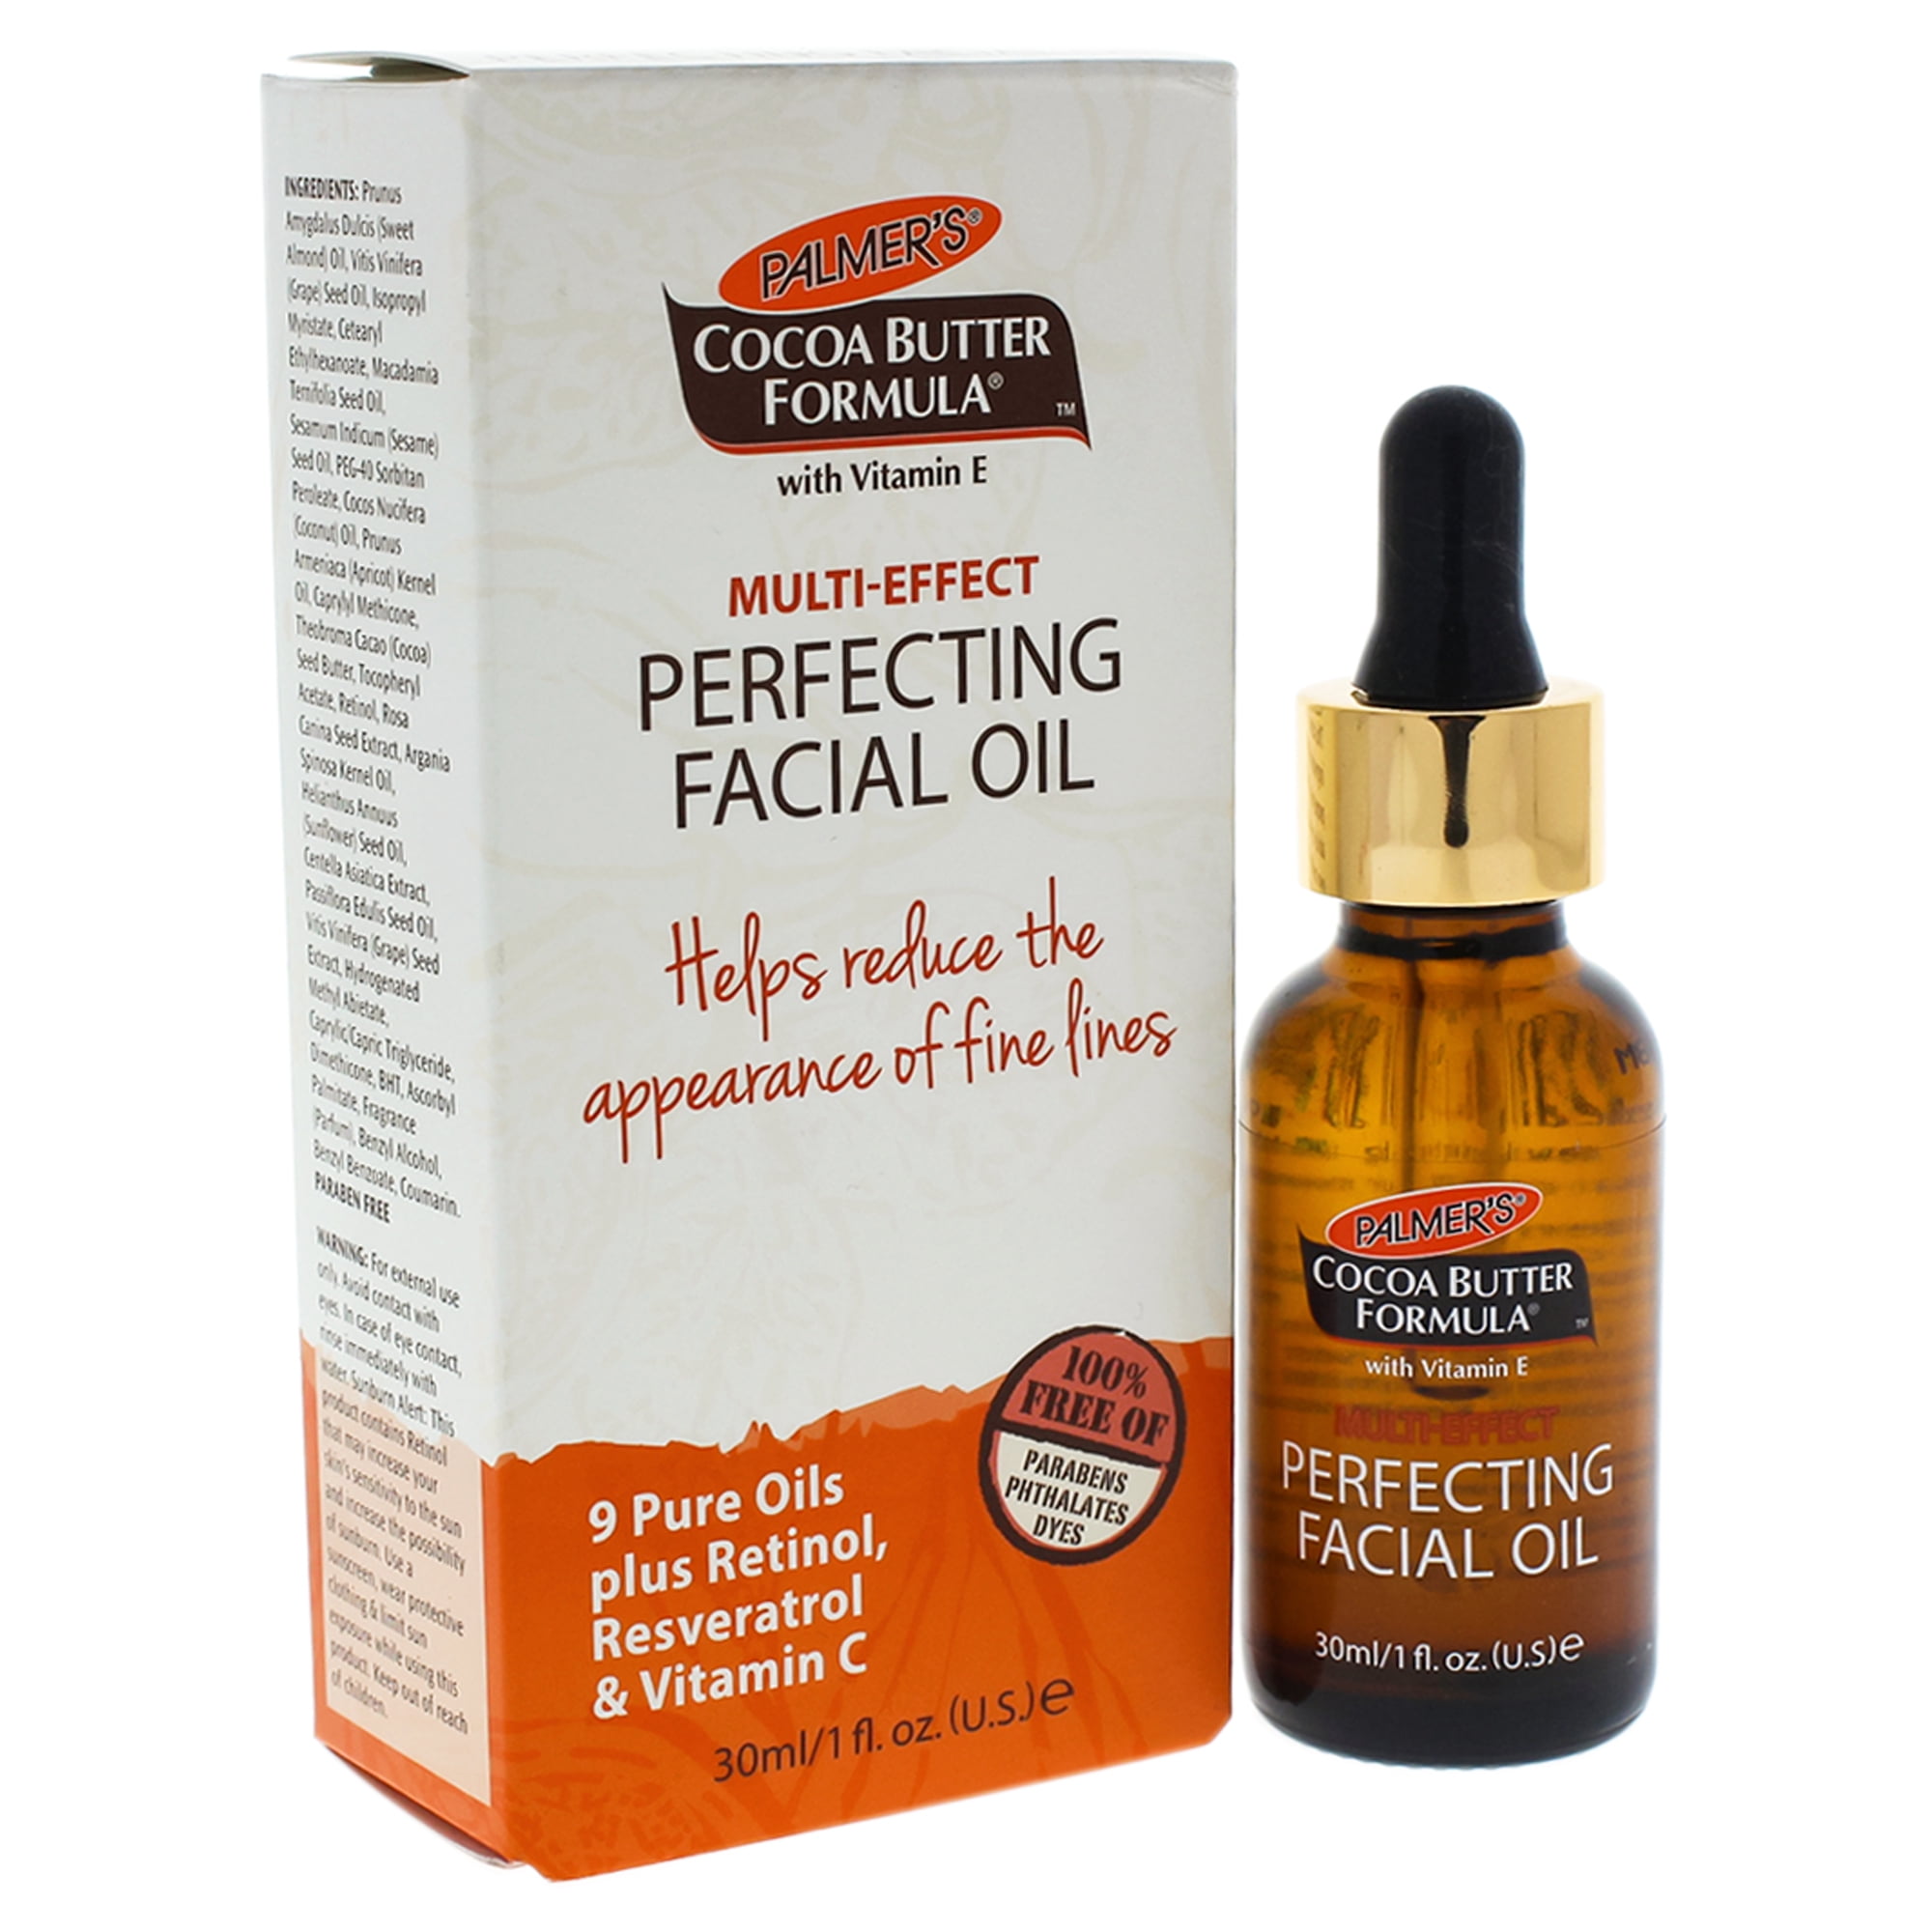 Cocoa Butter Perfecting Facial Oil by Palmers for Unisex - 1 oz Facial ...